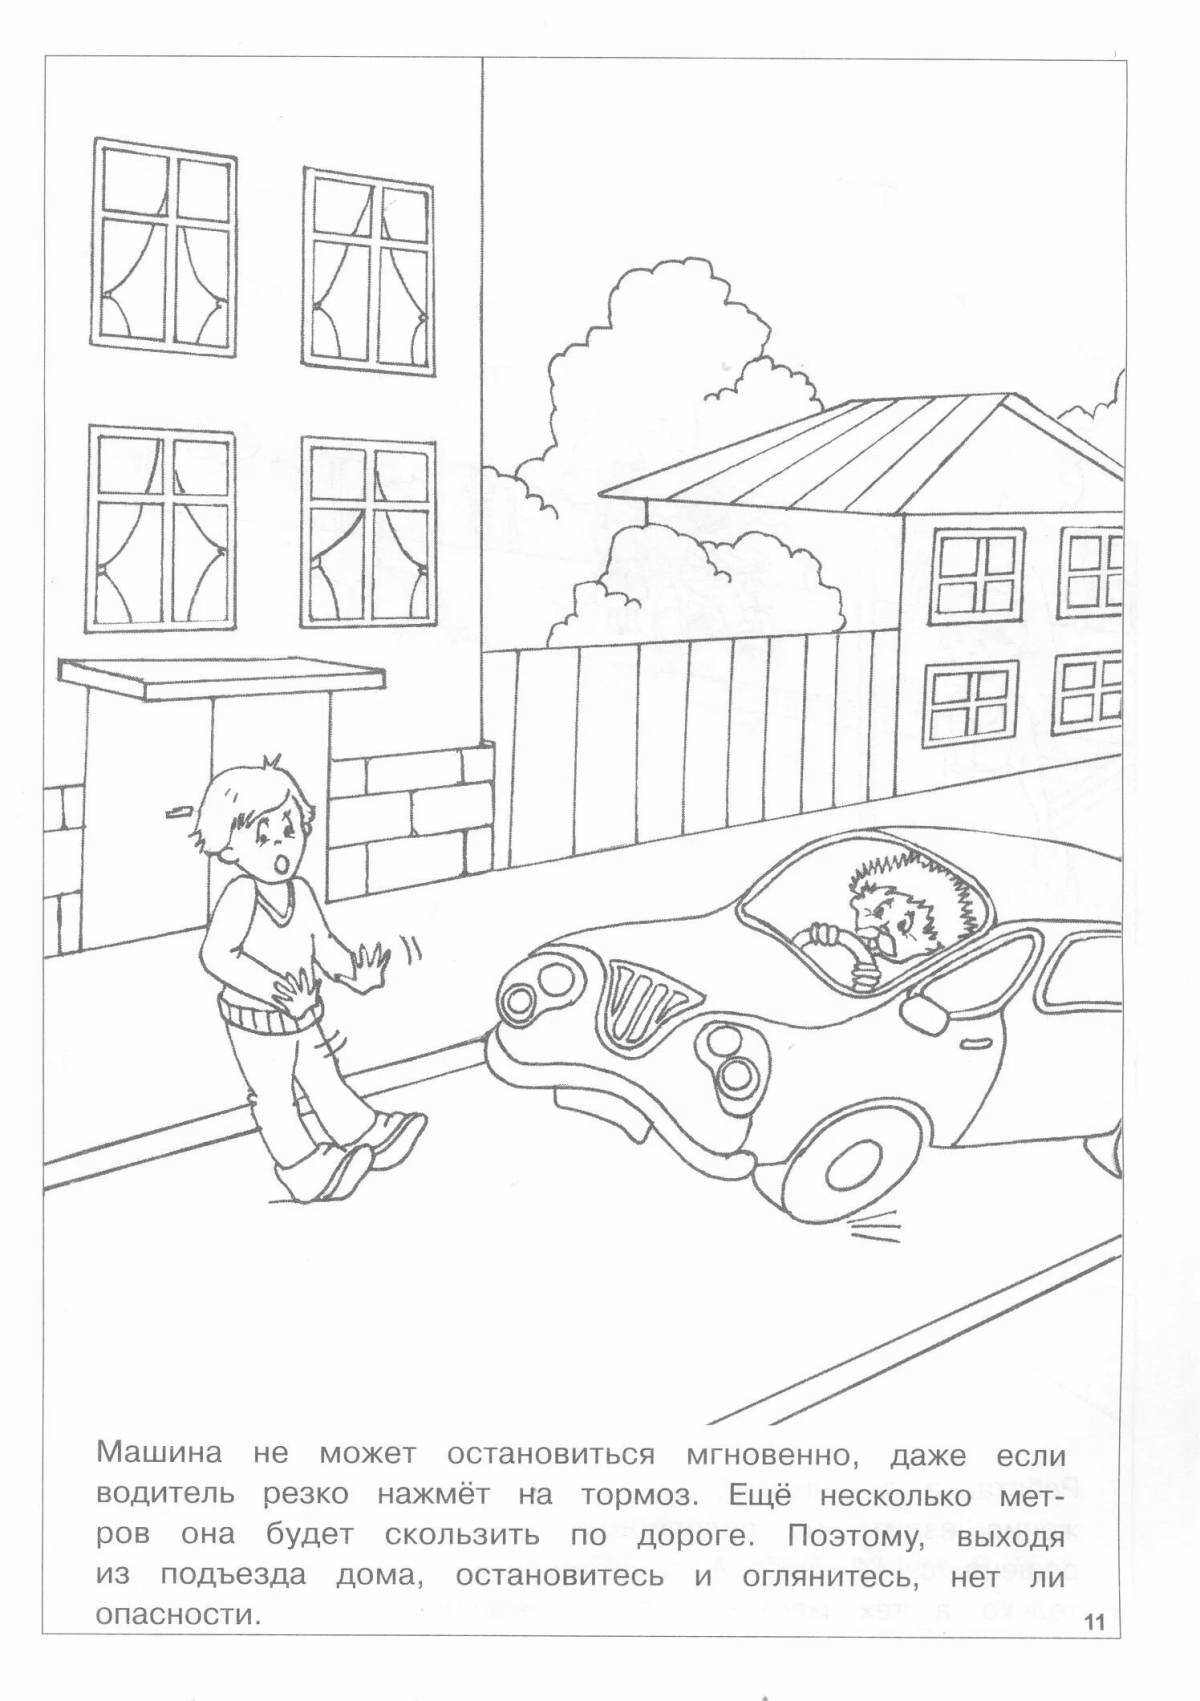 Live coloring of traffic rules for grade 2